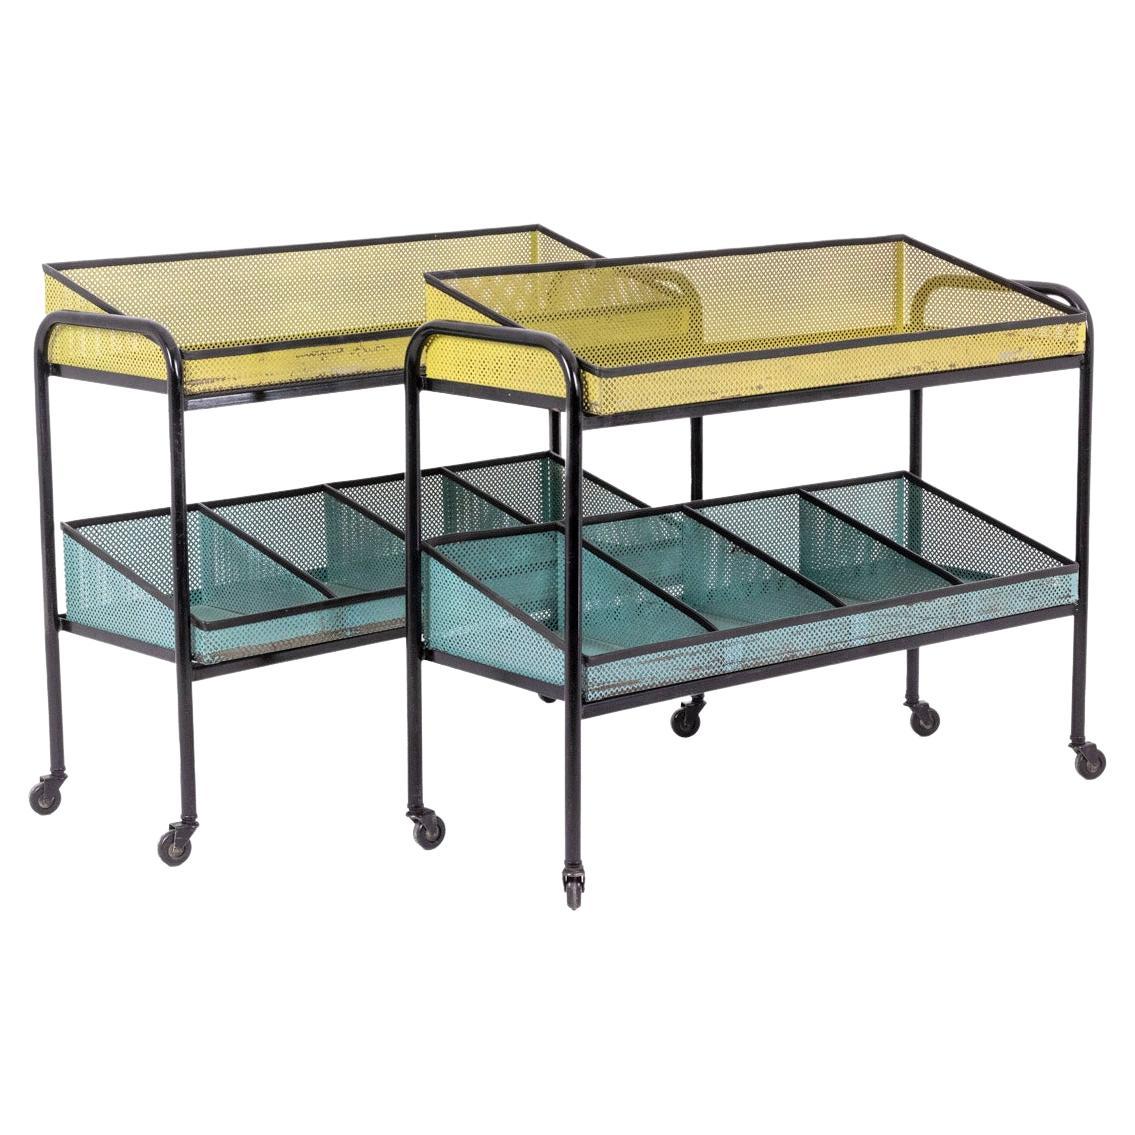 Pair of Console Tables in Perforated Sheet Metal and Metal, 1950s For Sale